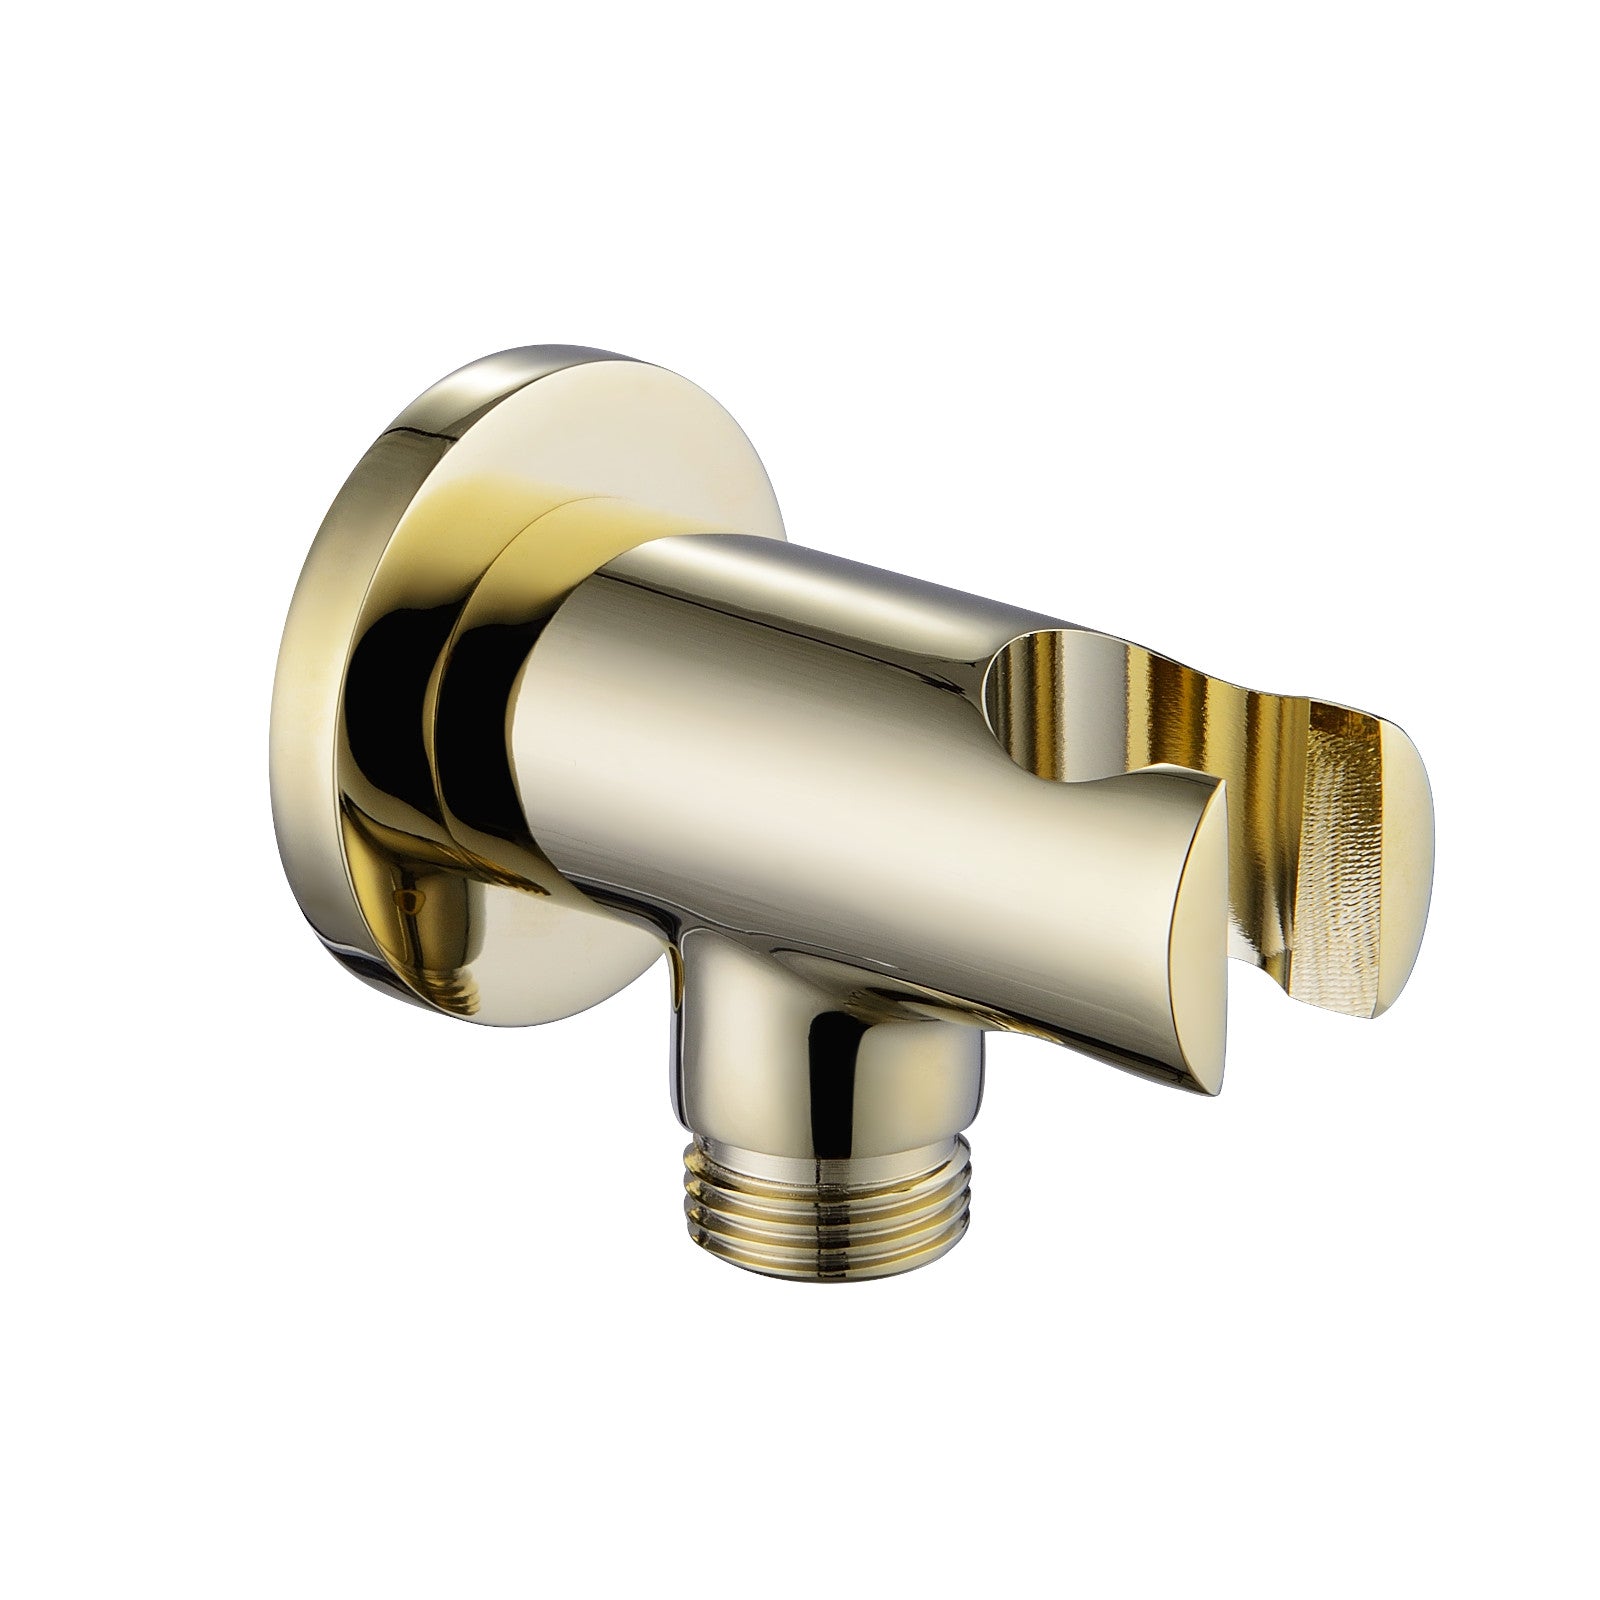 Round shower outlet elbow with holder for handheld shower head - English gold - Showers